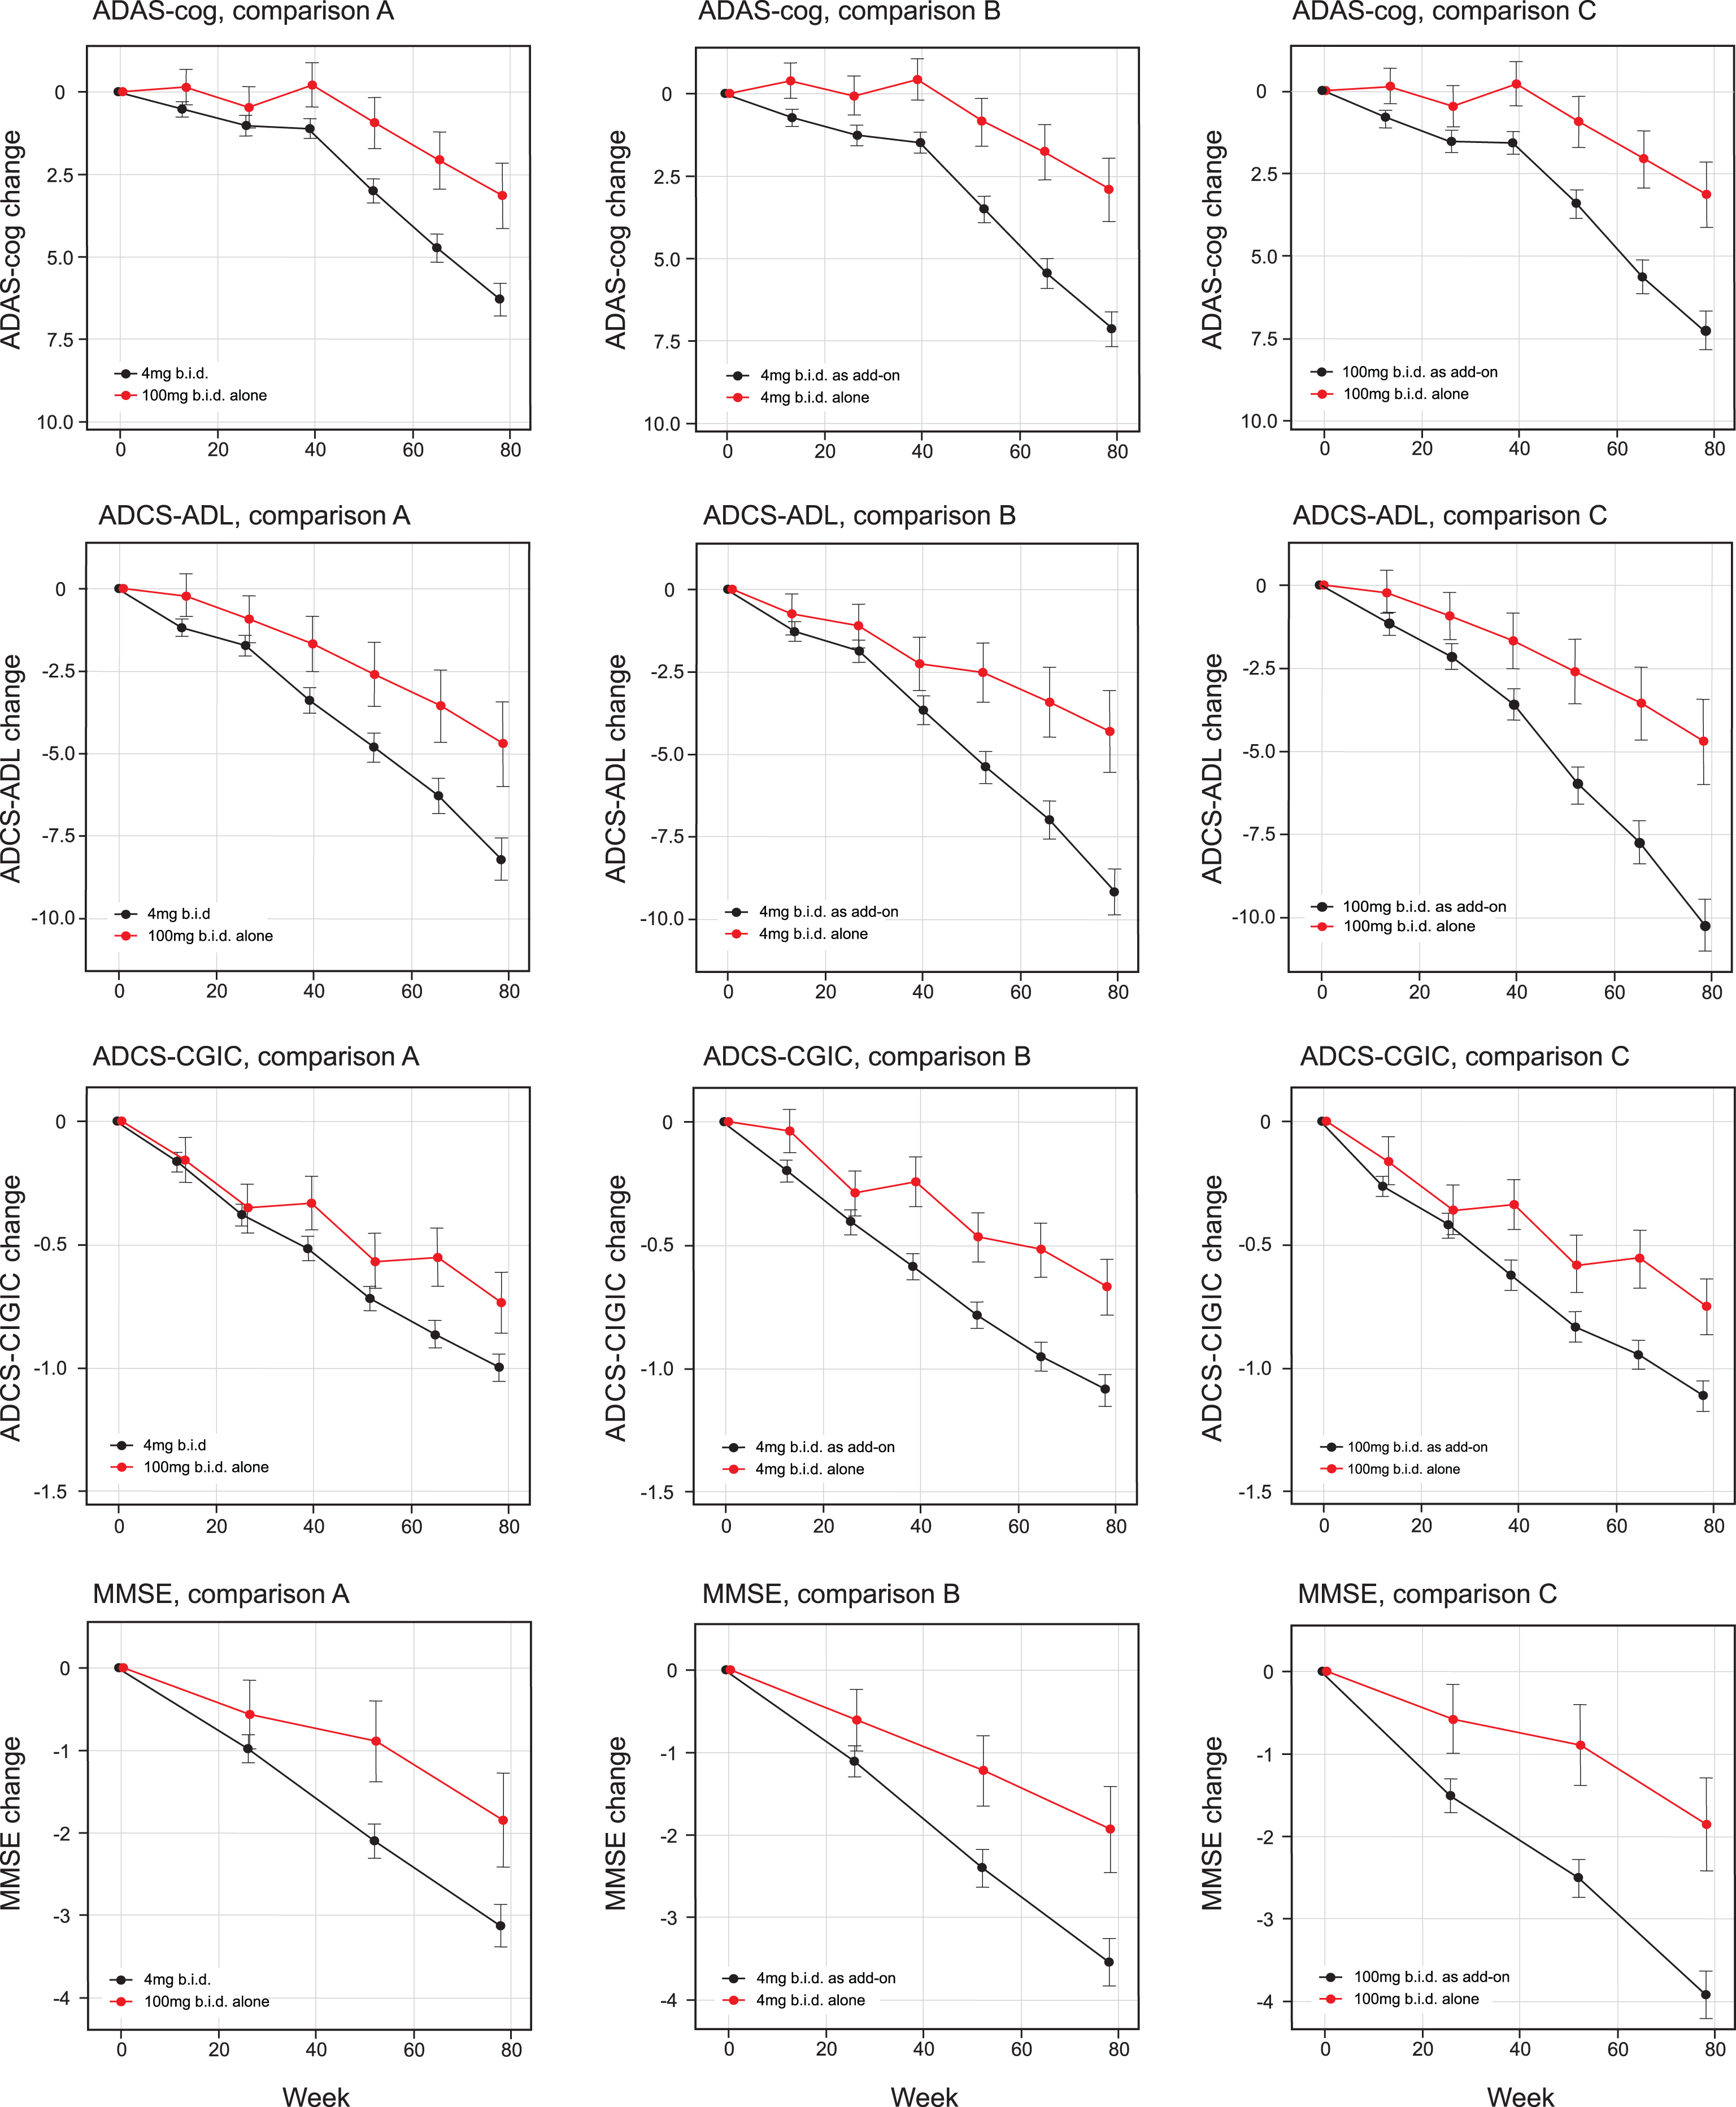 Least squares estimates of mean change from baseline and S.E. on primary and principal secondary outcomes. Primary analyses as defined in the revised Statistical Analysis Plan compared 100 mg twice a day as monotherapy with all patients receiving 4 mg twice a day (control as randomly assigned; comparison A) and 4 mg twice a day as monotherapy with same dose as add-on to approved treatment for AD (comparison B). Comparison C, 100 mg twice a day as monotherapy with same dose as add-on to approved treatment for AD, is also shown.